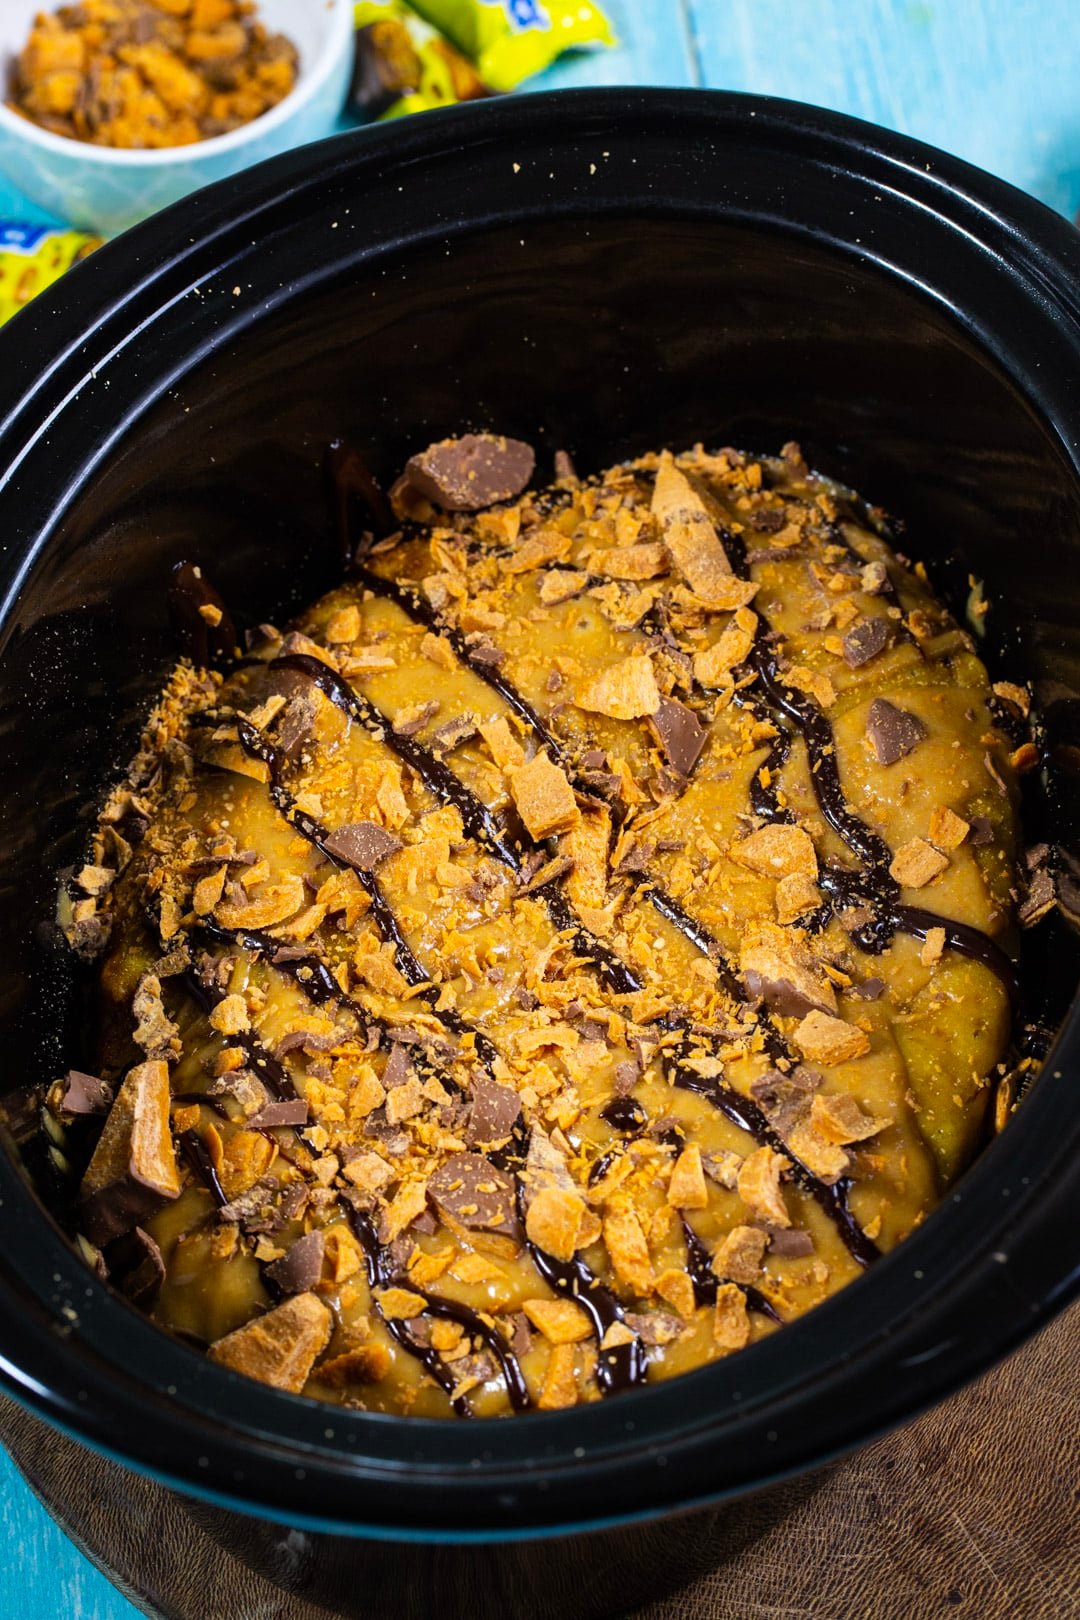 Frosted cake in slow cooker.